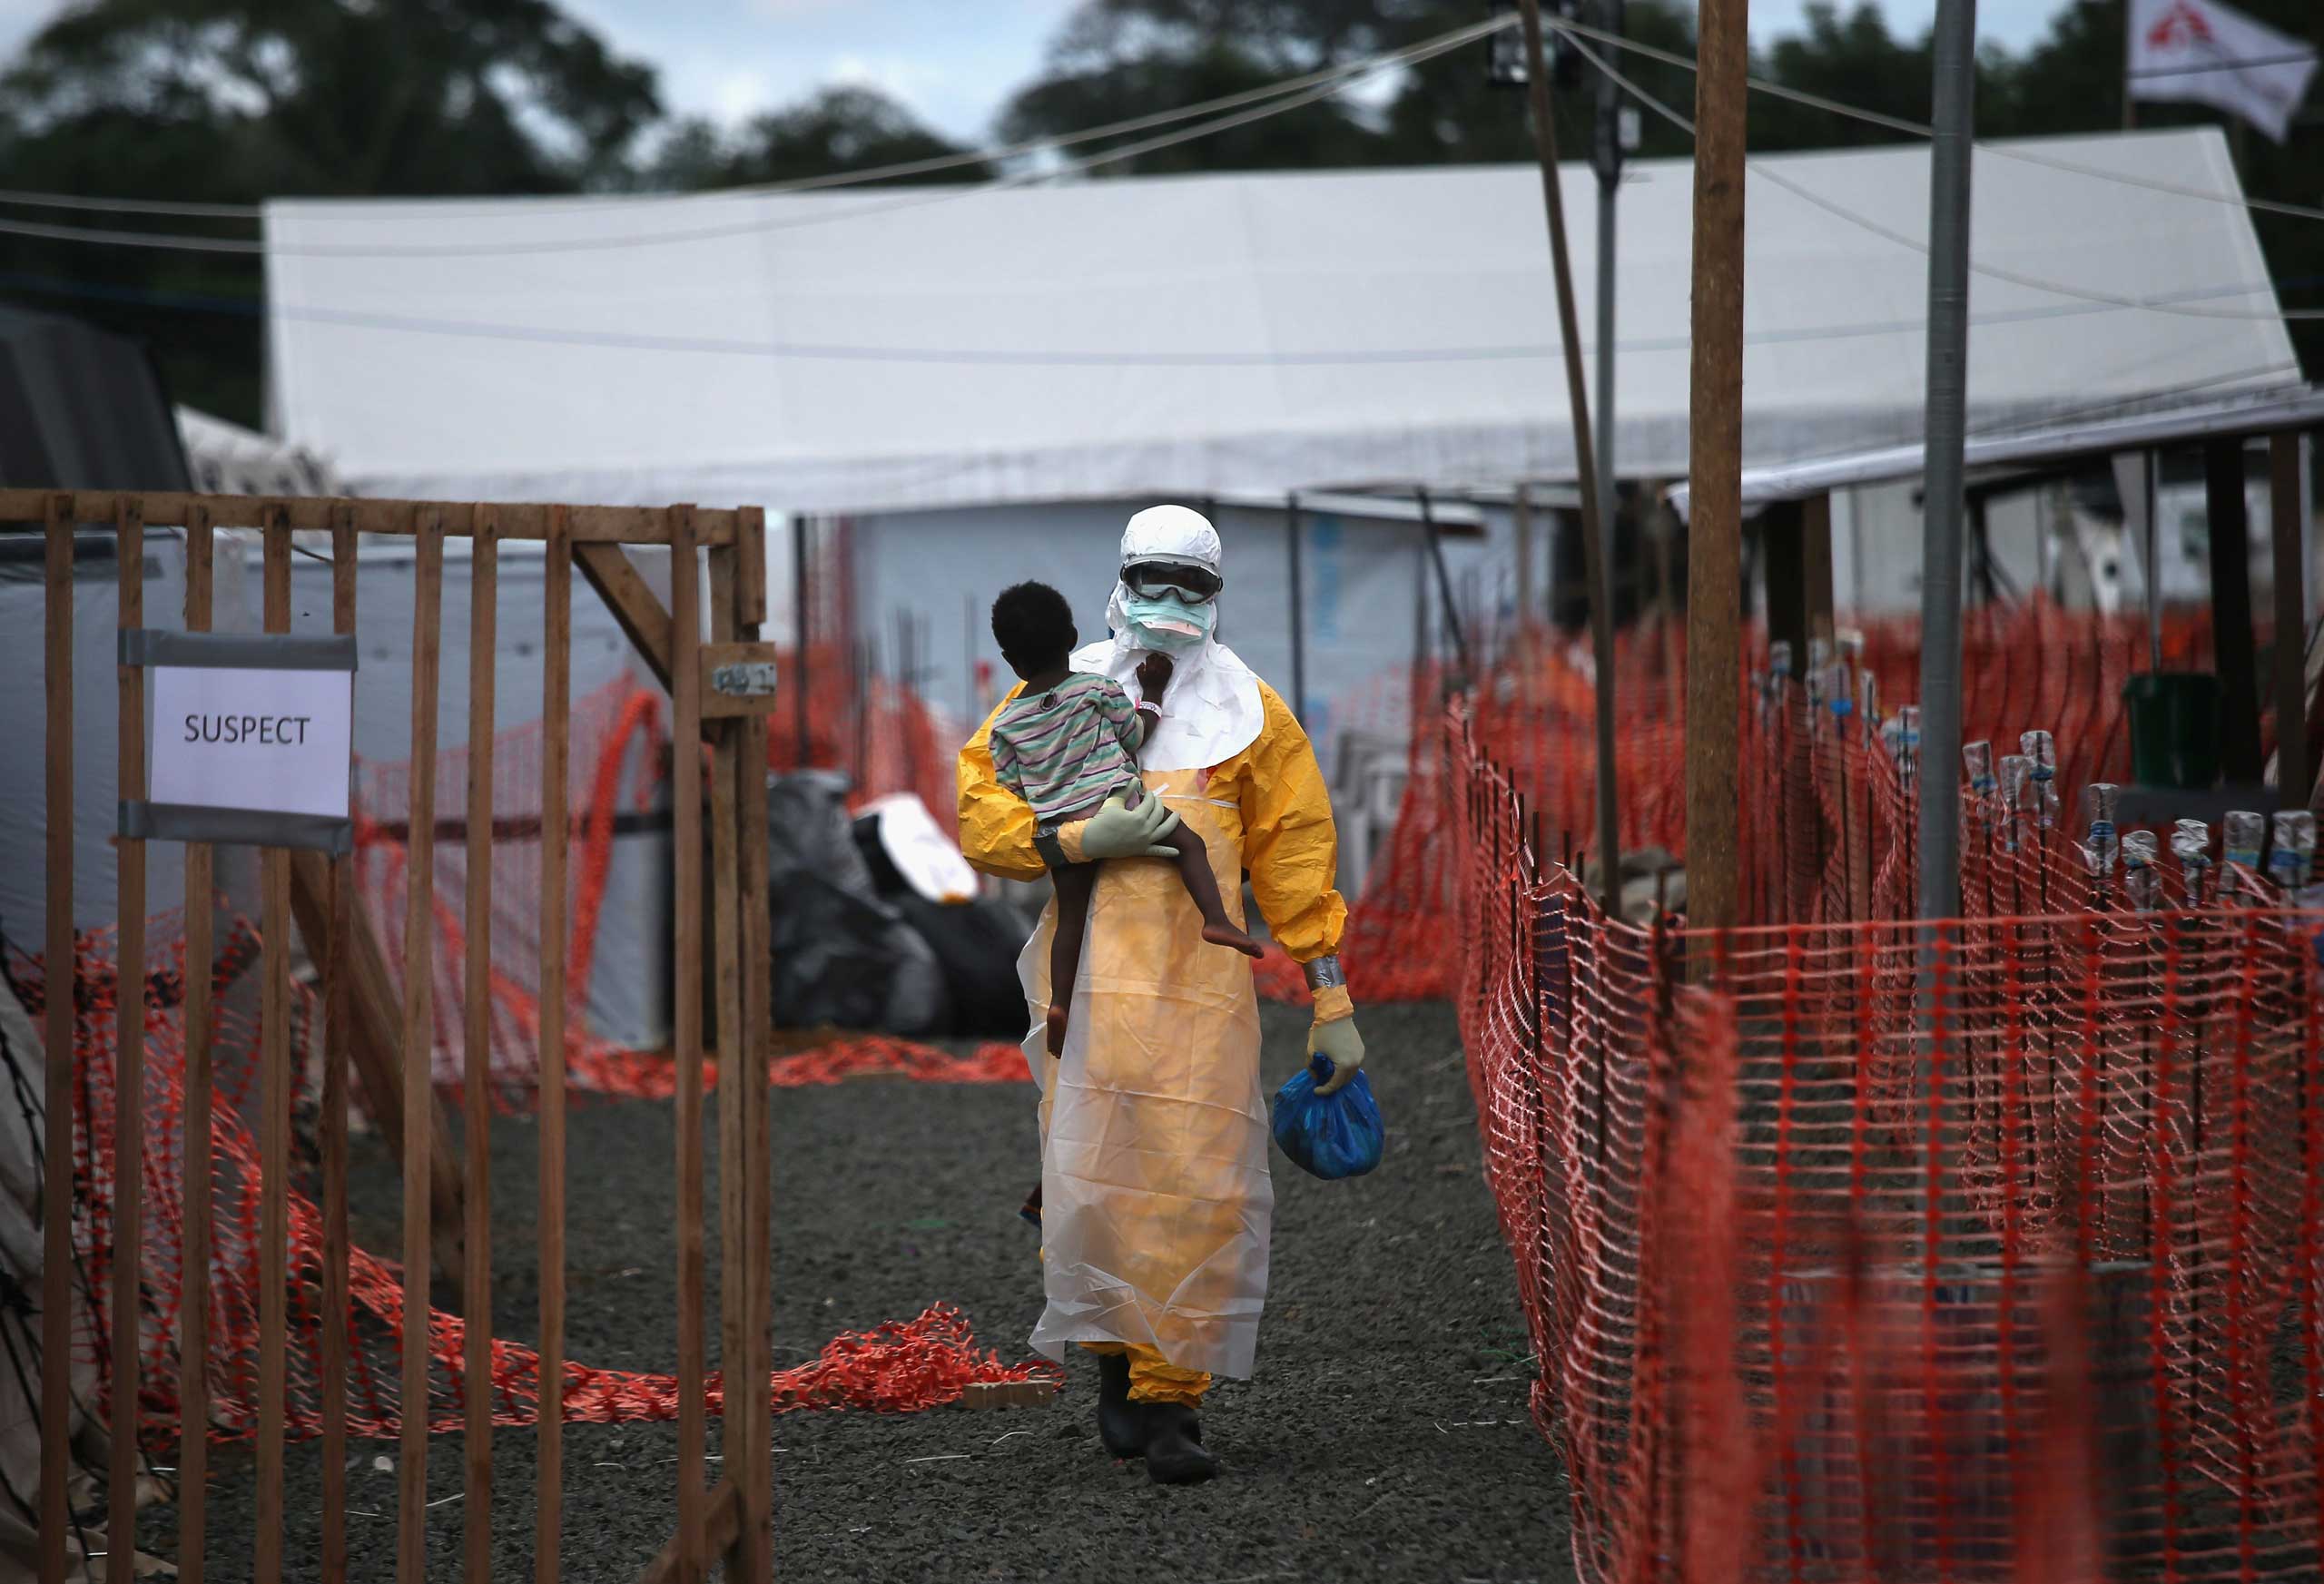 A Doctors Without Borders health worker in protective clothing carries a child suspected of having Ebola in the MSF treatment center on Oct. 5, 2014, in Paynesville, Liberia (John Moore—Getty Images)